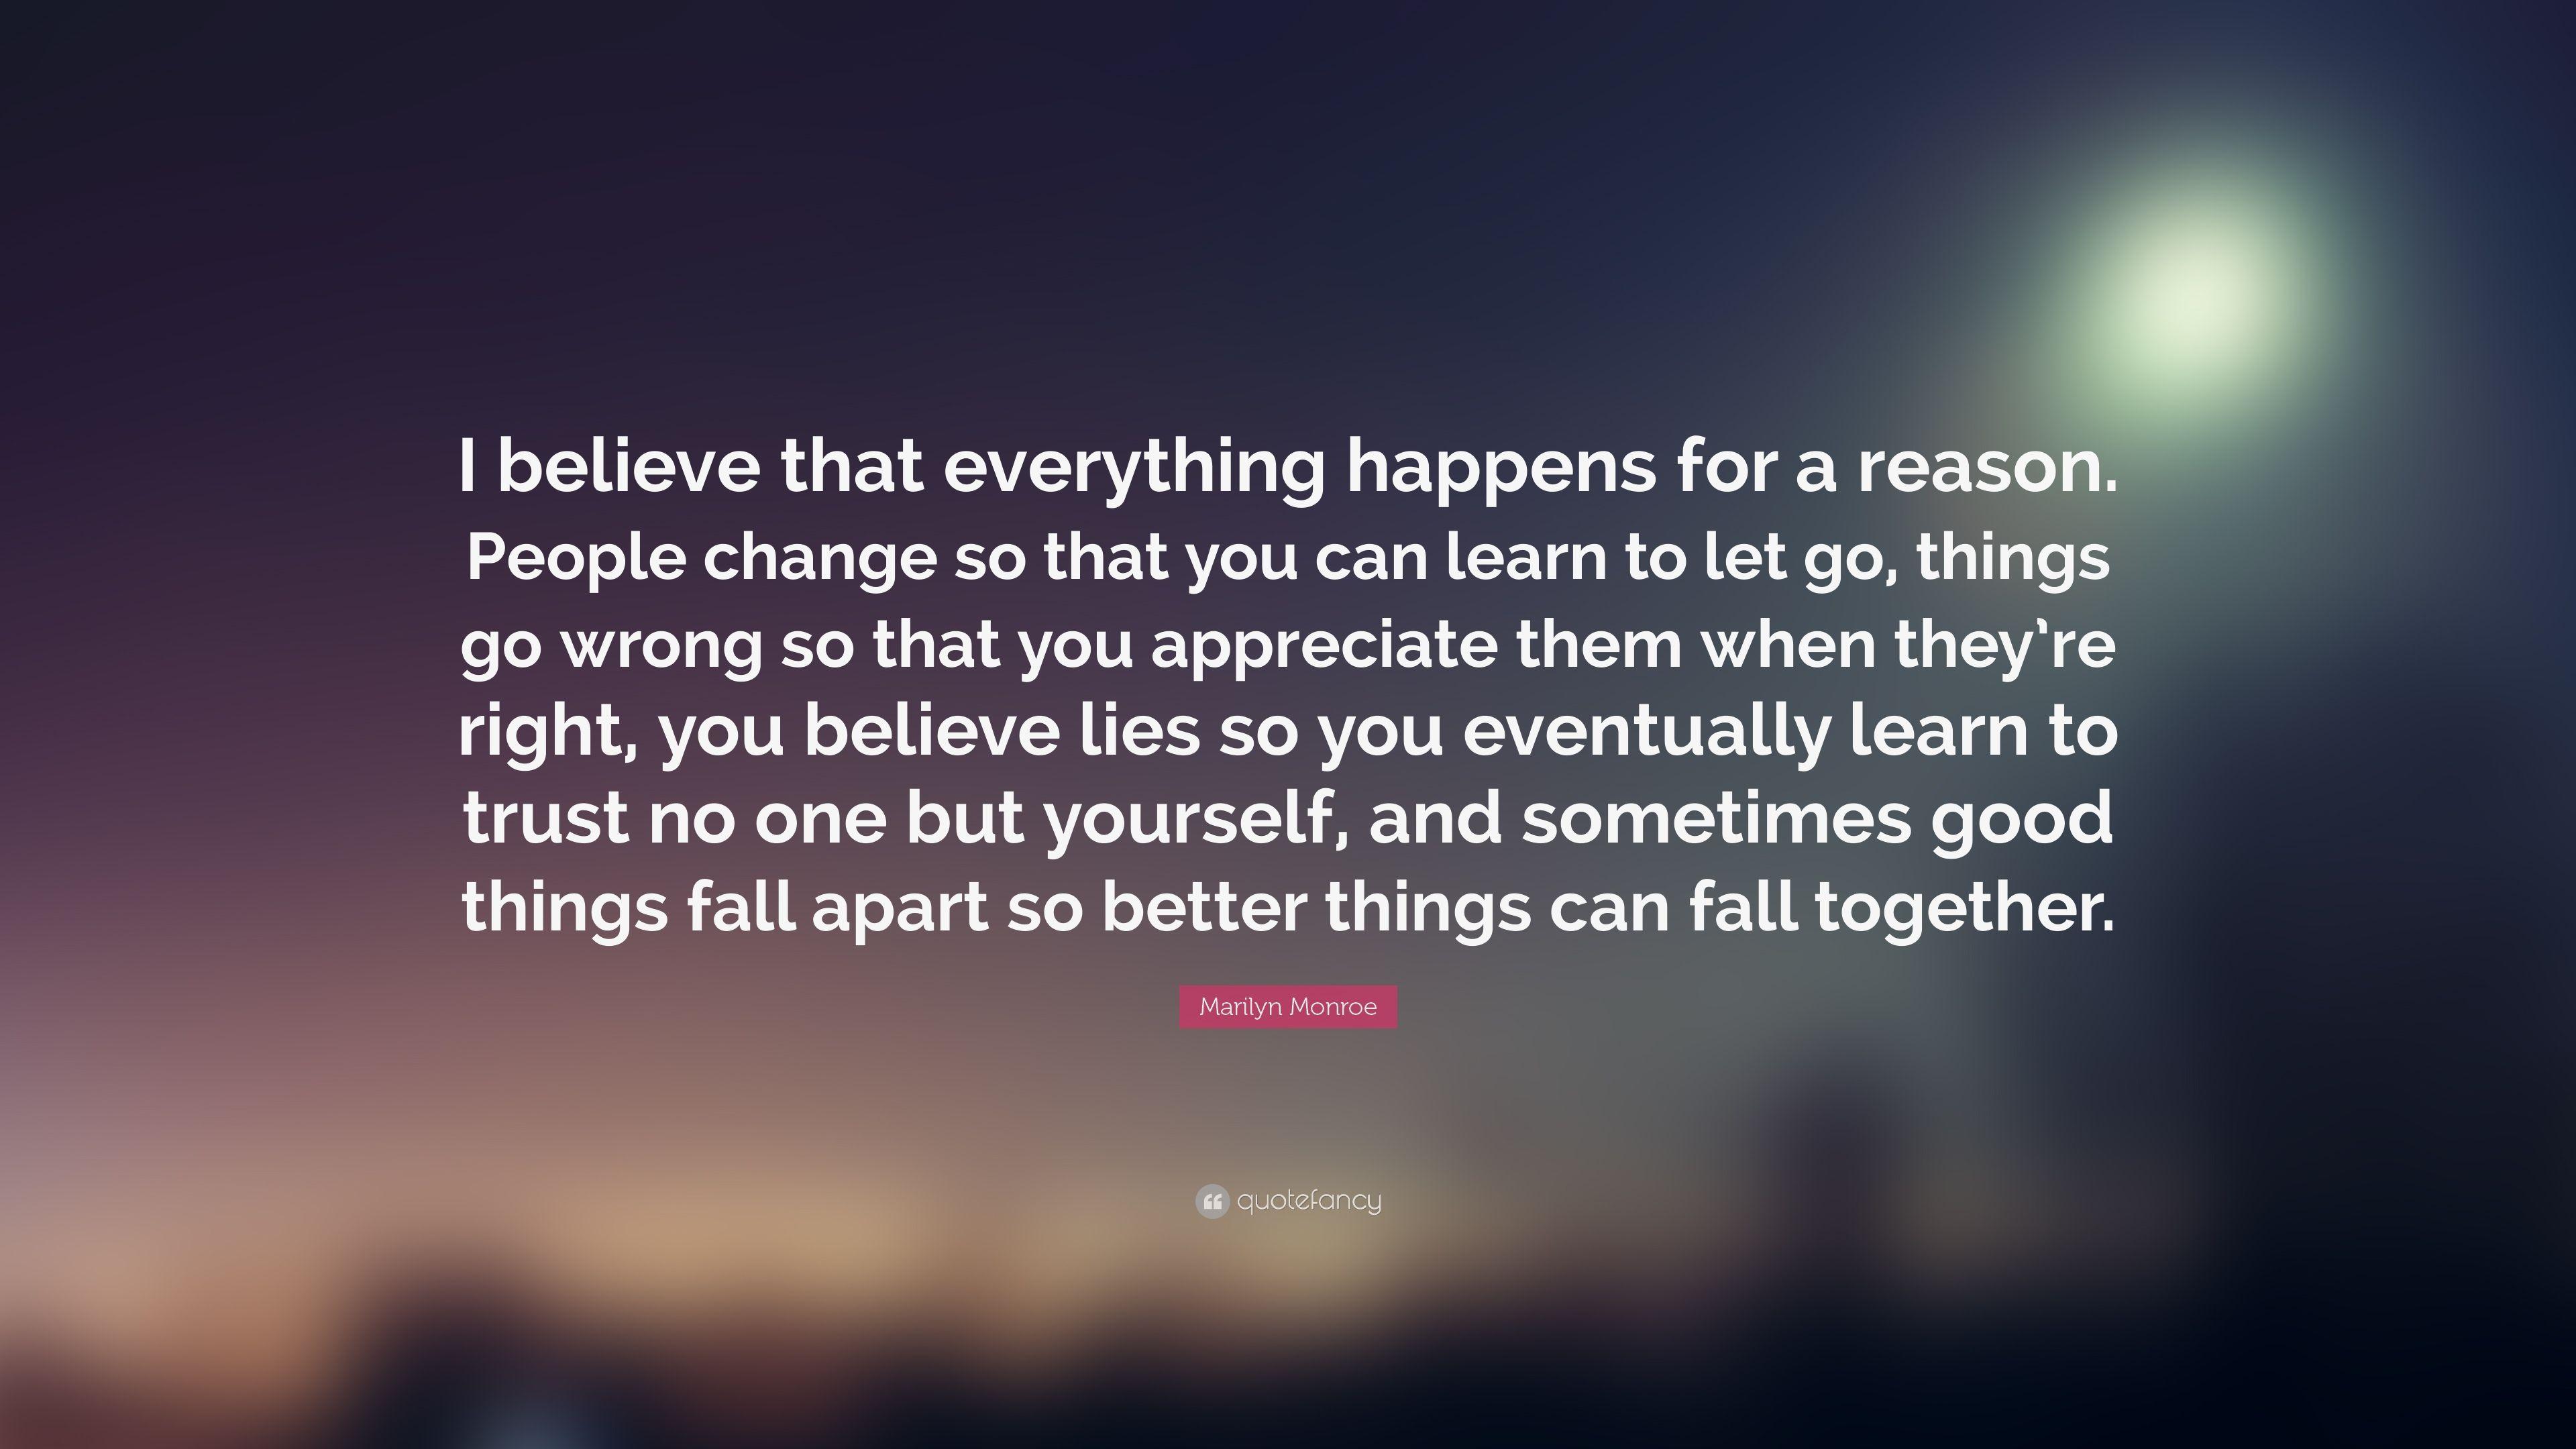 Marilyn Monroe Quote: “I believe that everything happens for a